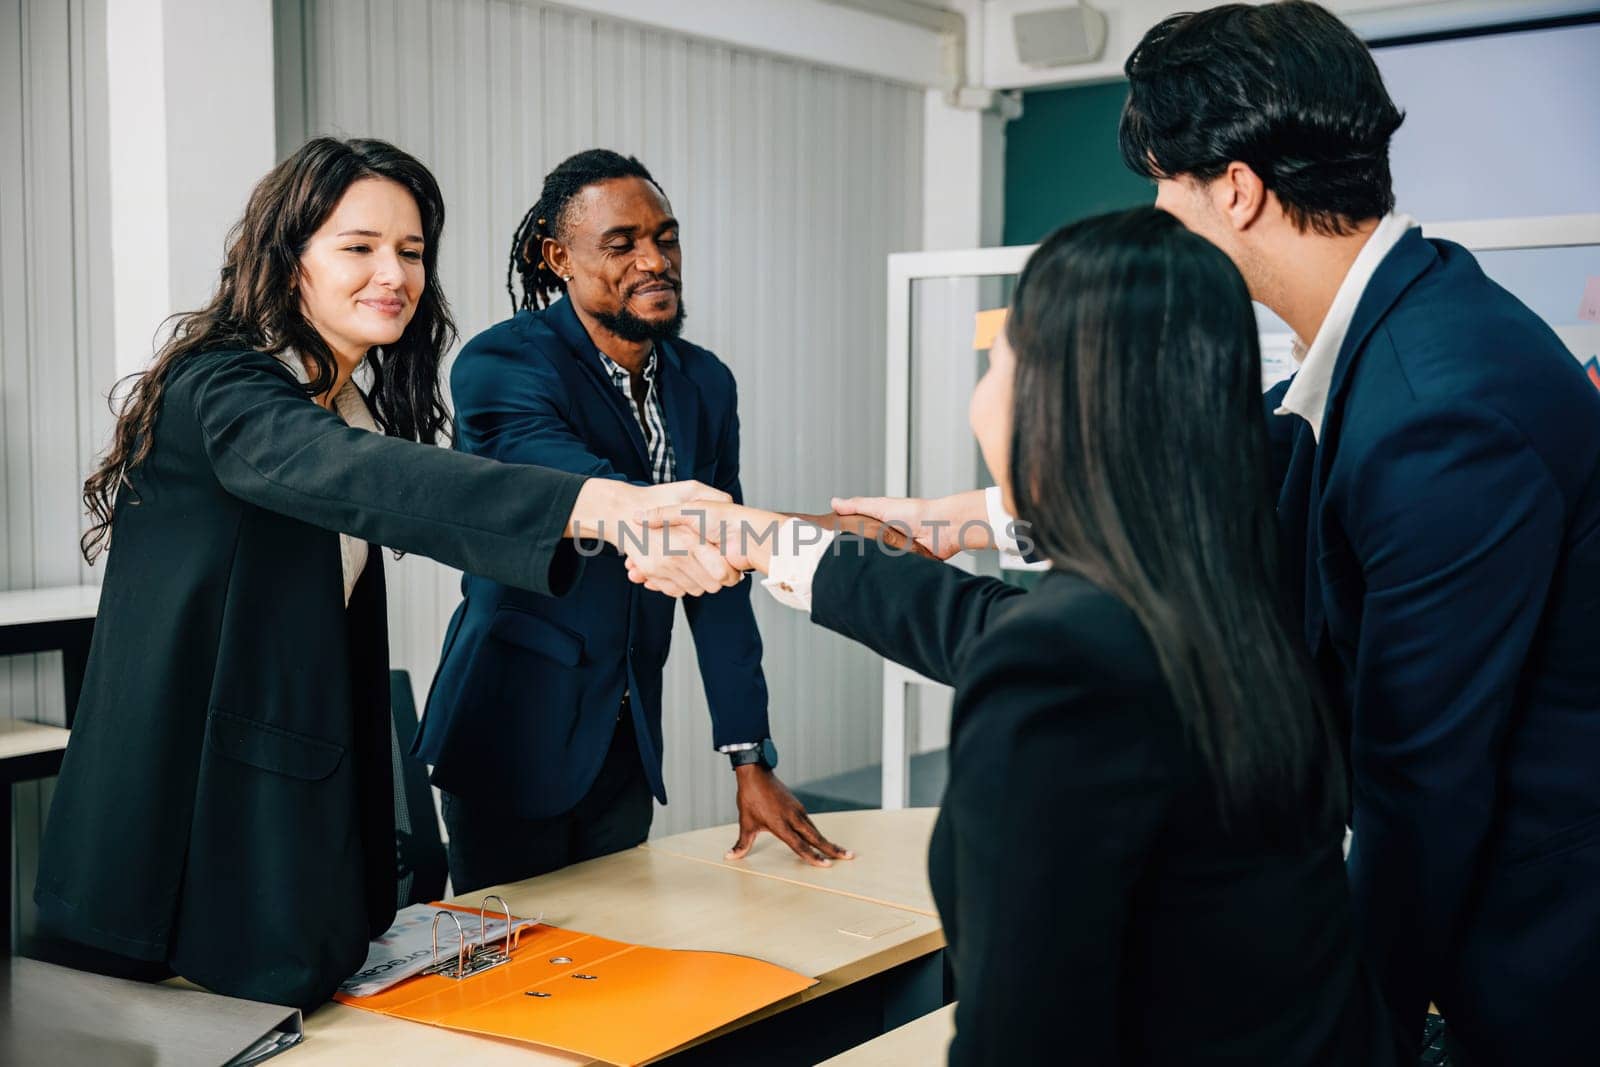 Professionals in an office seal a deal with a handshake, symbolizing success. Executives, lawyers, and managers collaborate to celebrate their partnership after a meeting. Teamwork by Sorapop